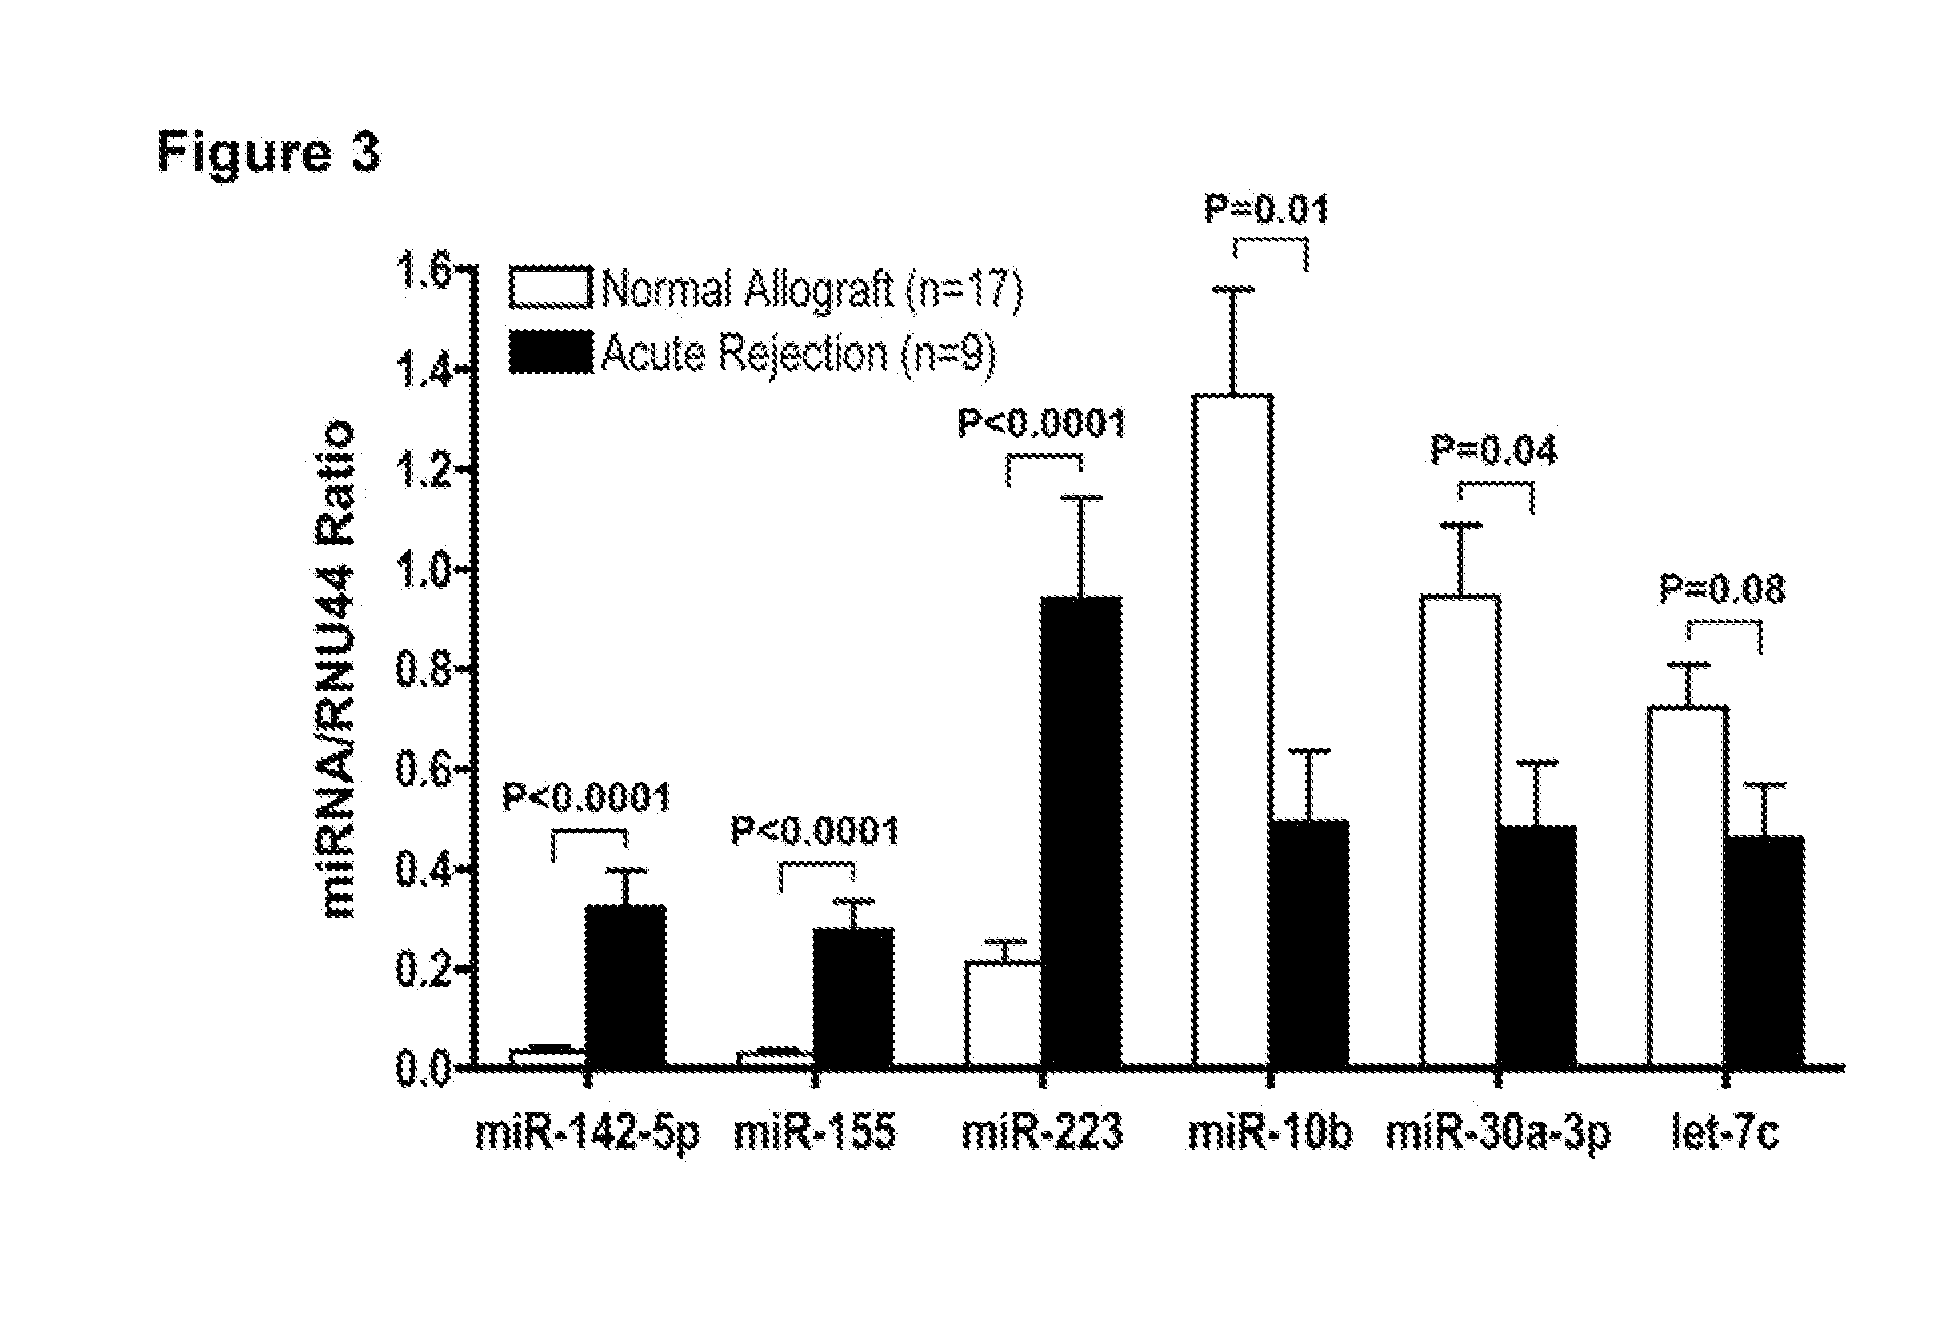 Method to assess human allograft status from microrna expression levels